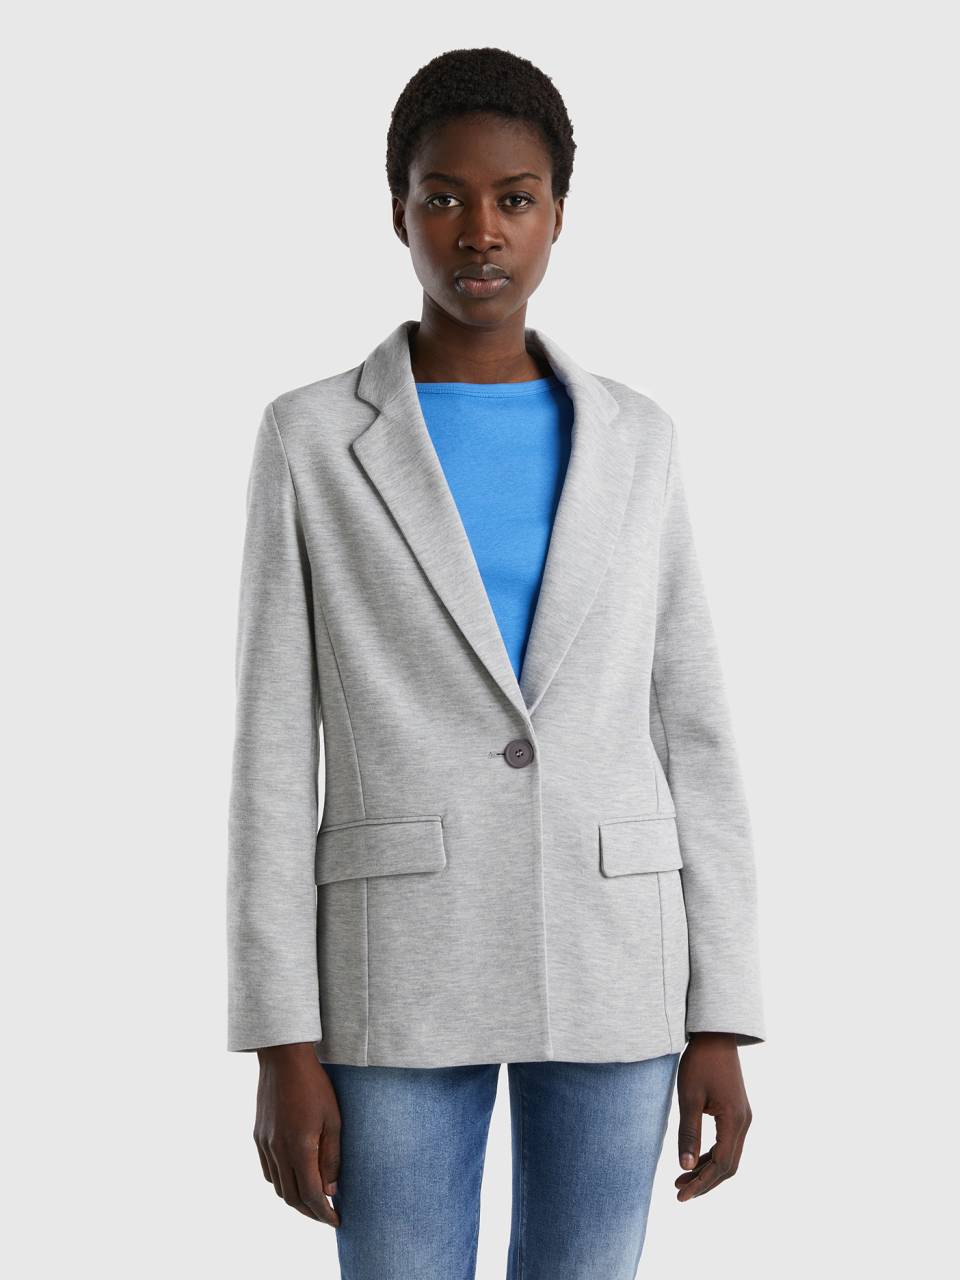 Benetton fitted blazer with pockets. 1